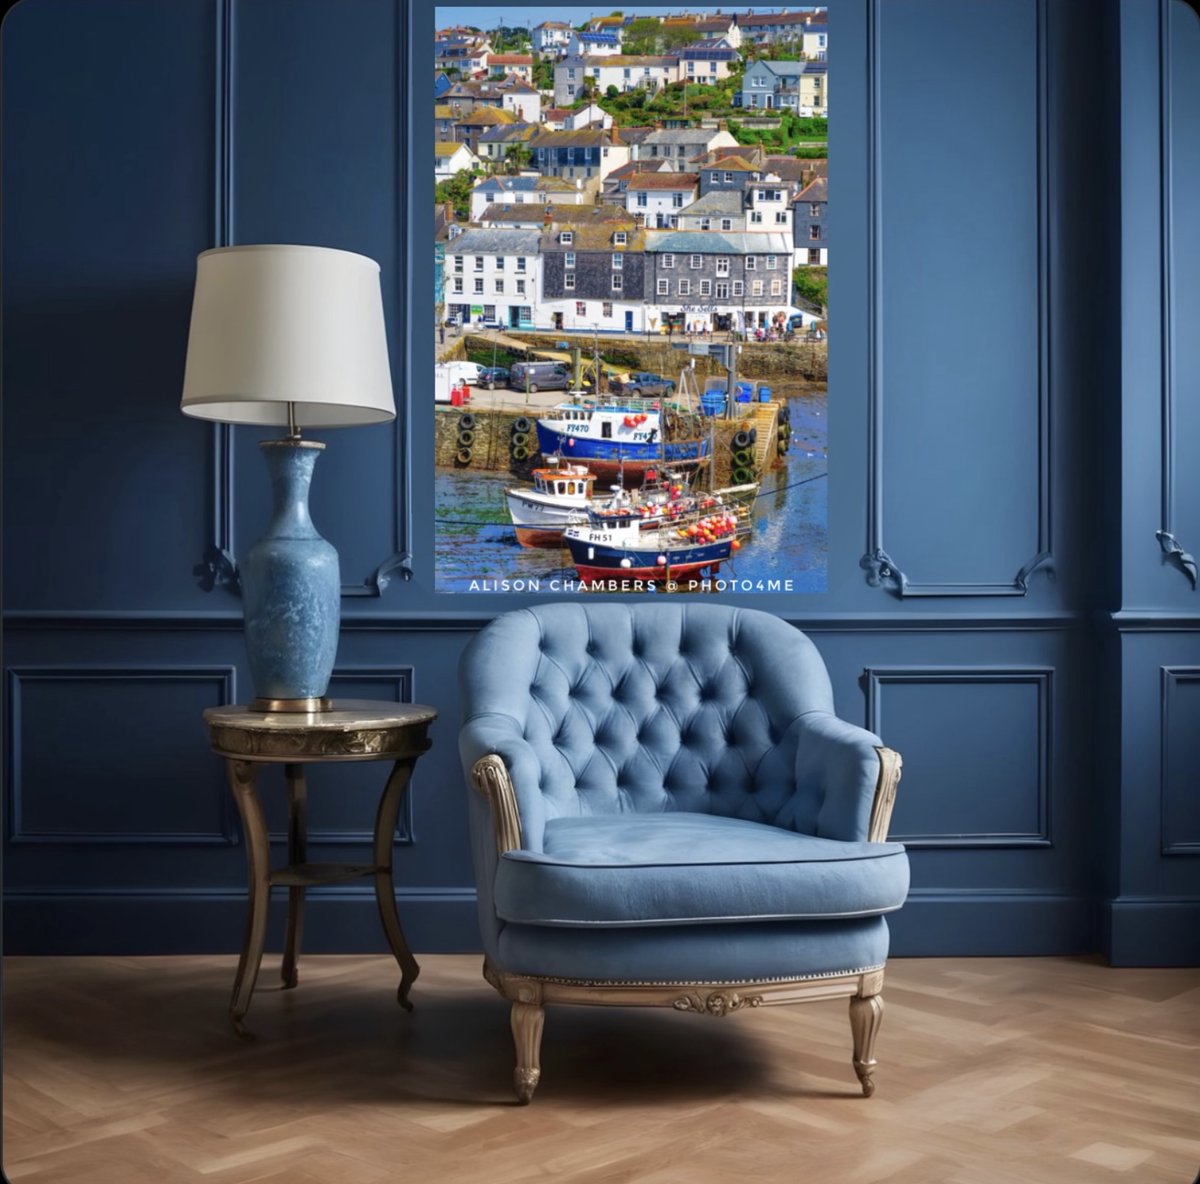 Mevagissey©️. Available from; shop.photo4me.com/1331359 & redbubble.com/161157189 & 2-alison-chambers.pixels.com #mevagissey #mevagisseyharbour #cornwall #cornish #cornishcoast #photo4me #redbubble #fineartamerica